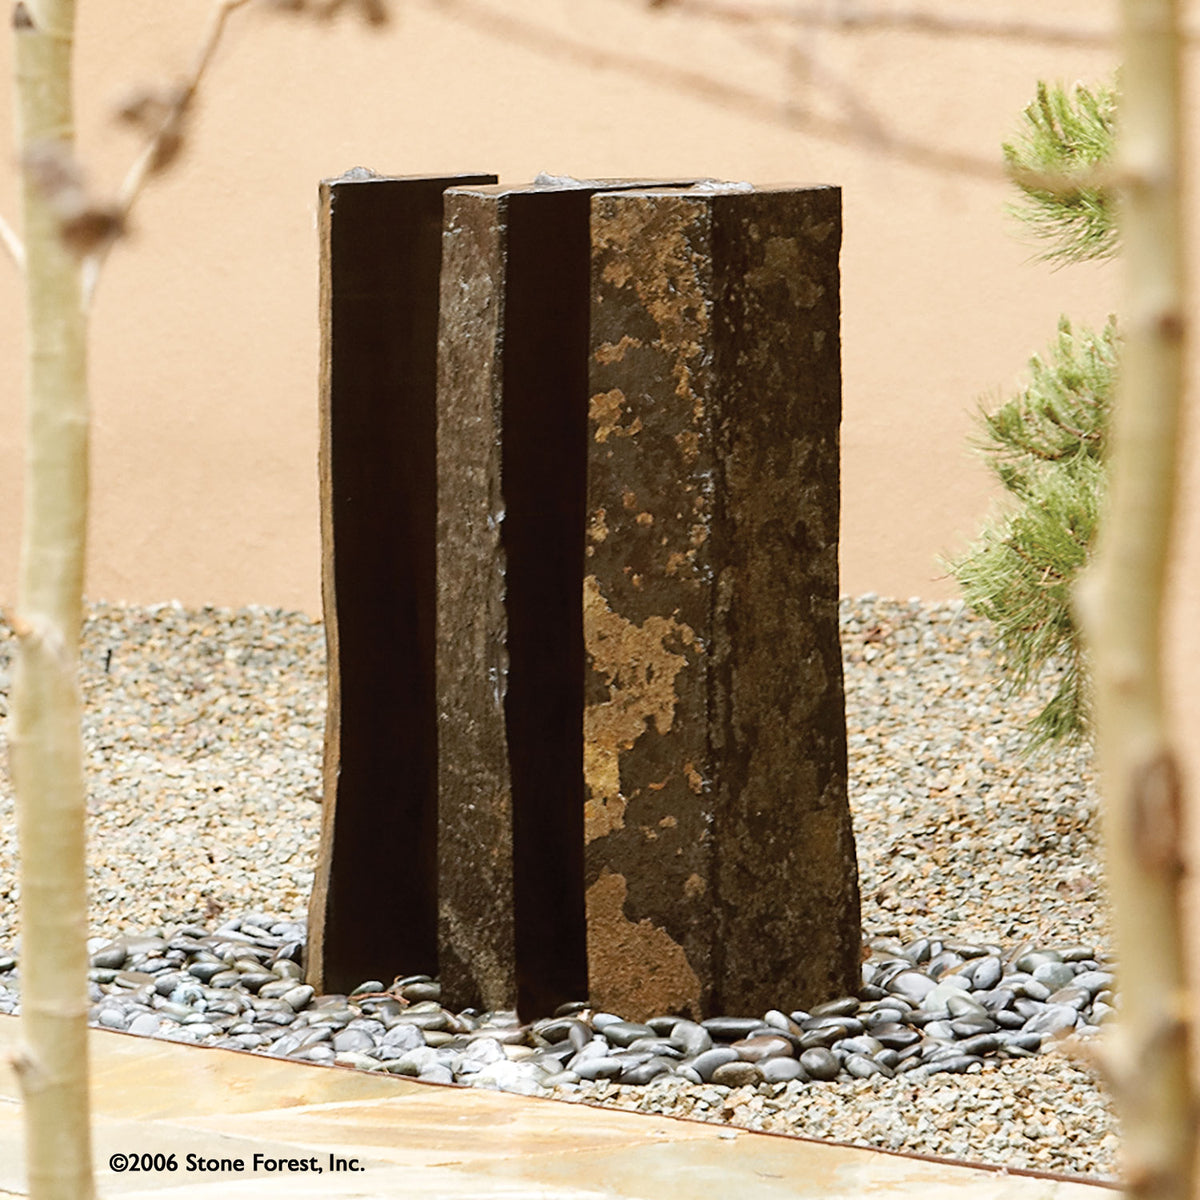 Triple Basalt Fountains (Sets of 3) image 1 of 4